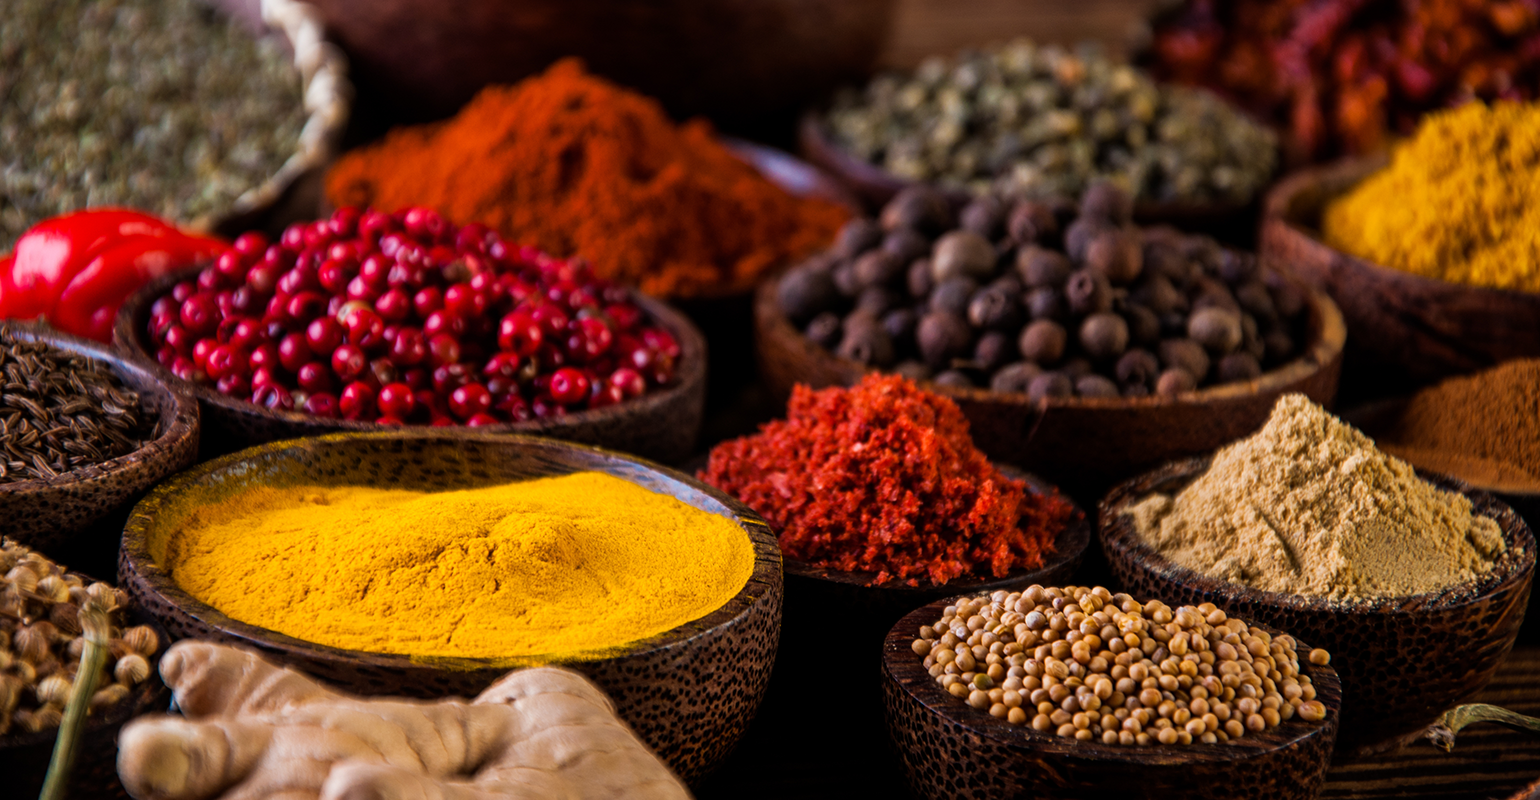 The food ingredient market in Egypt and Africa [Report]